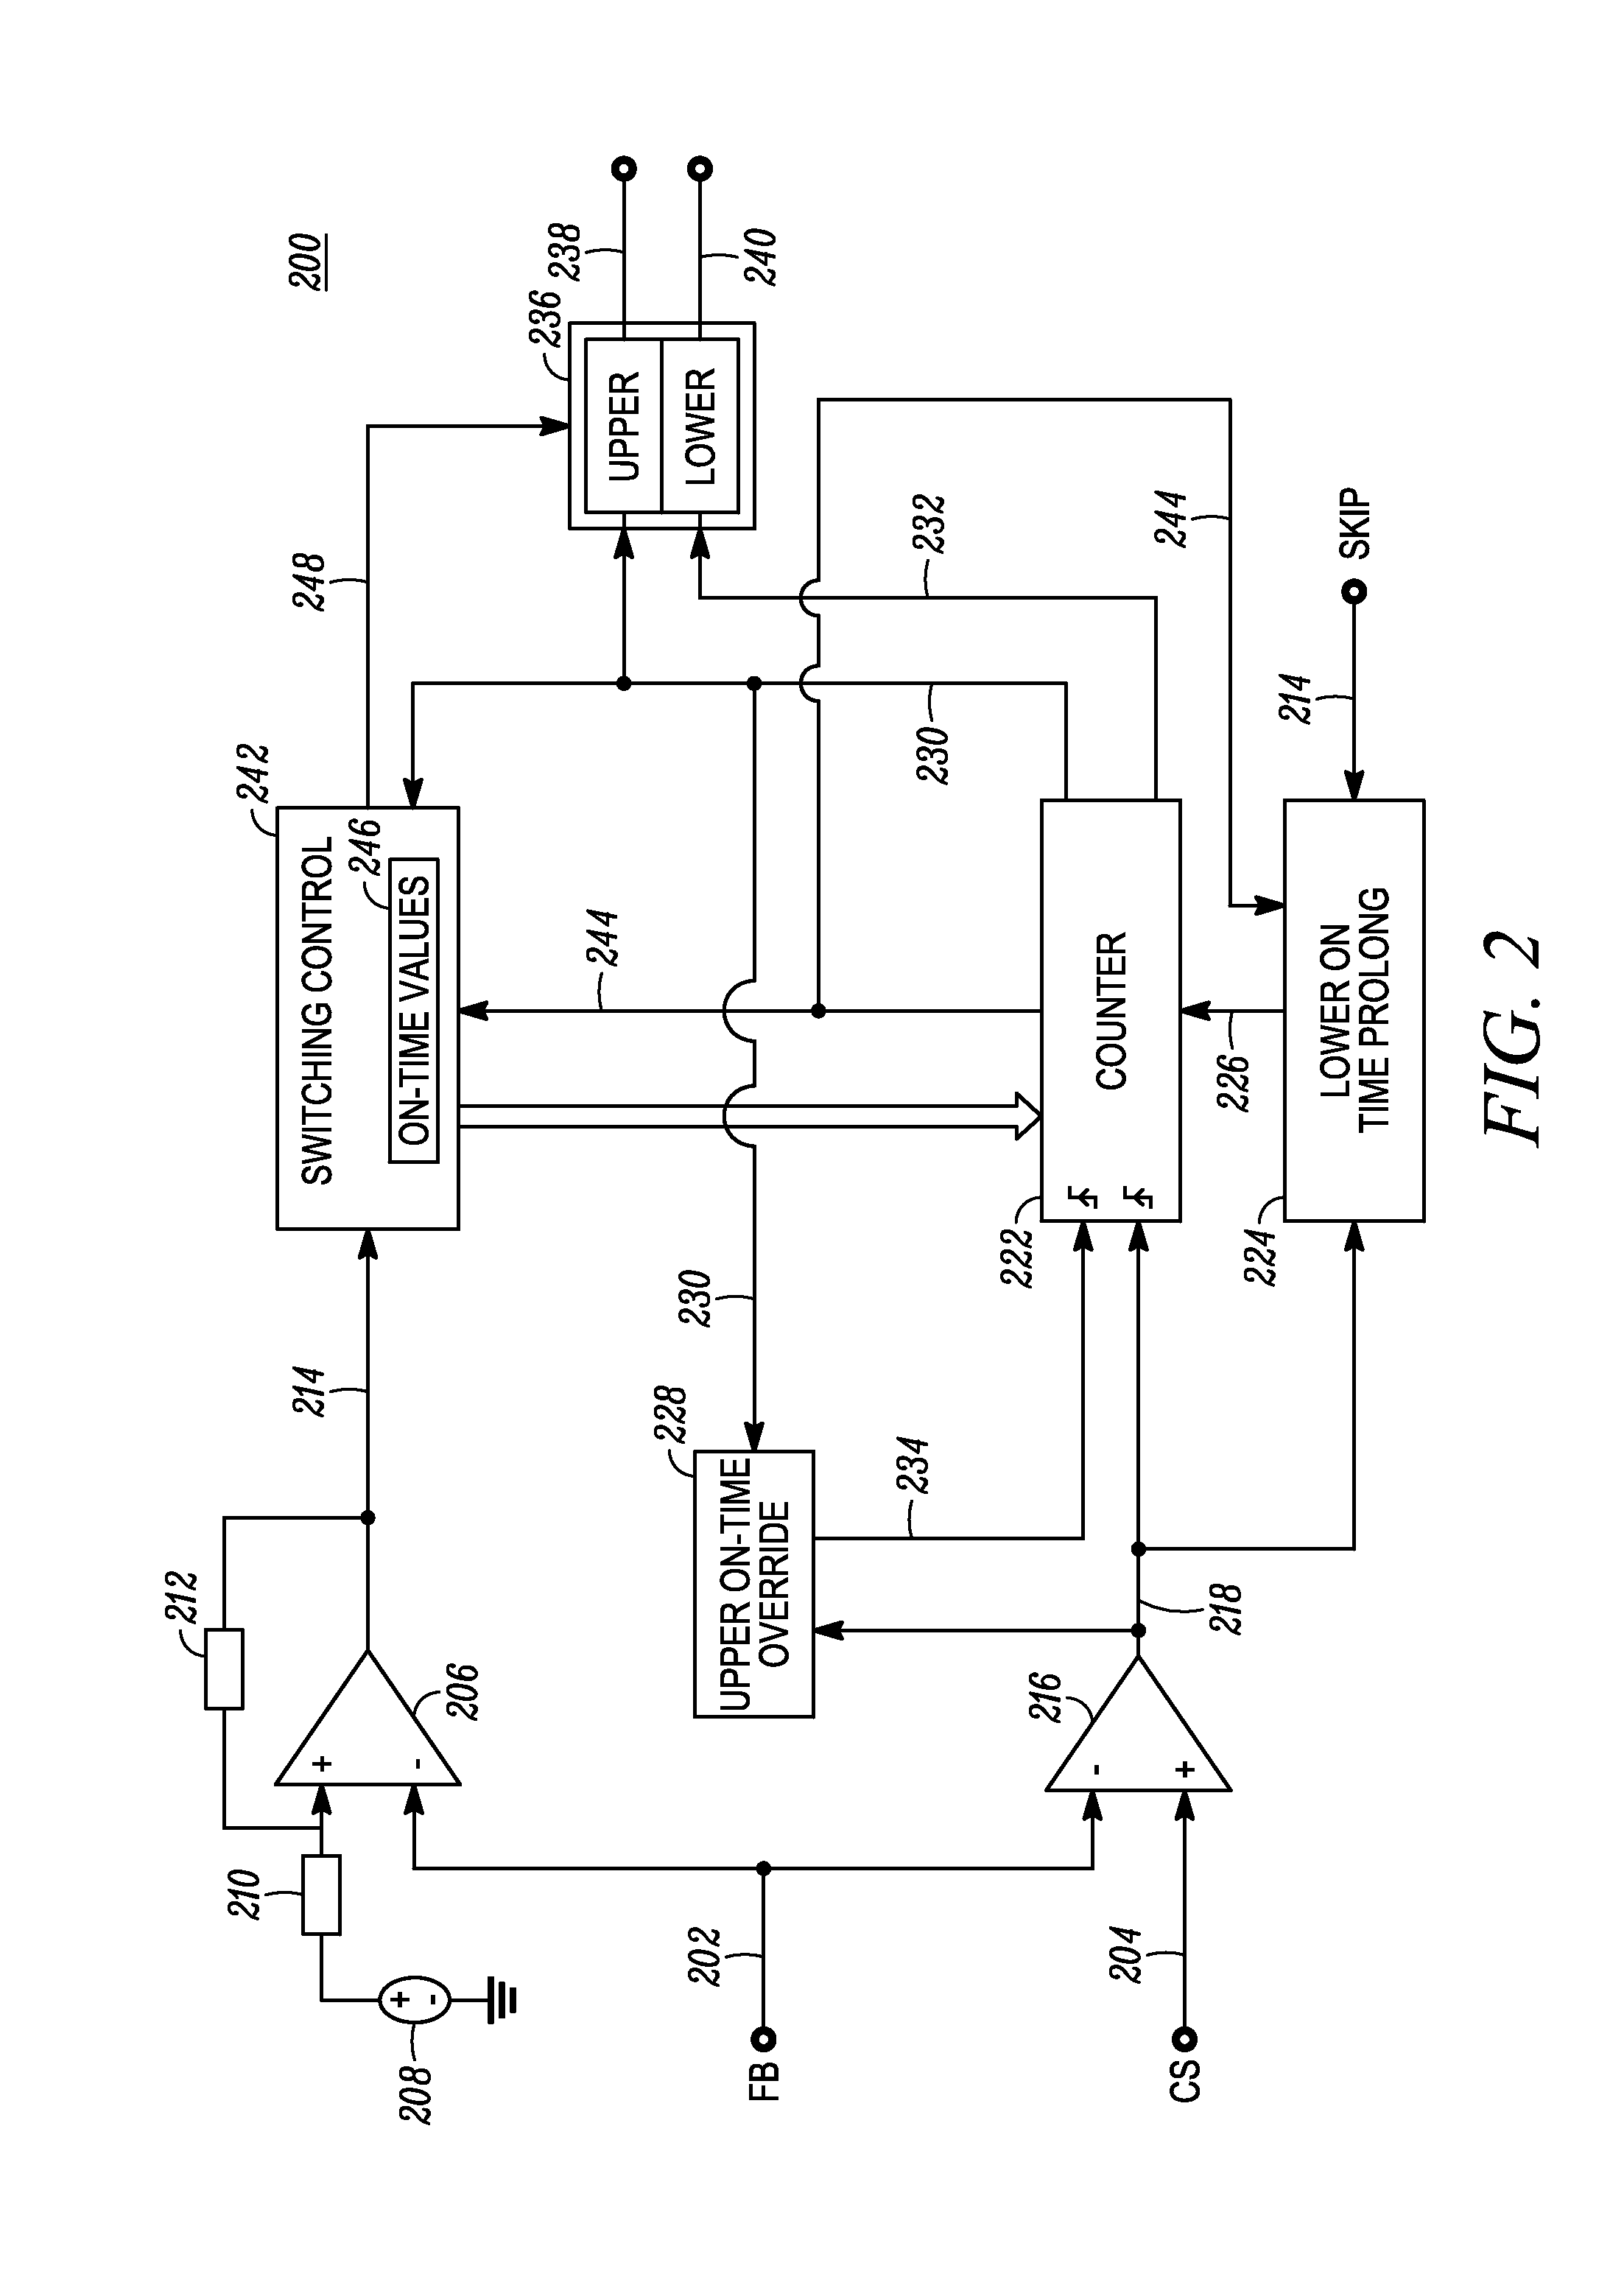 Method and apparatus for dedicated skip mode for resonant converters